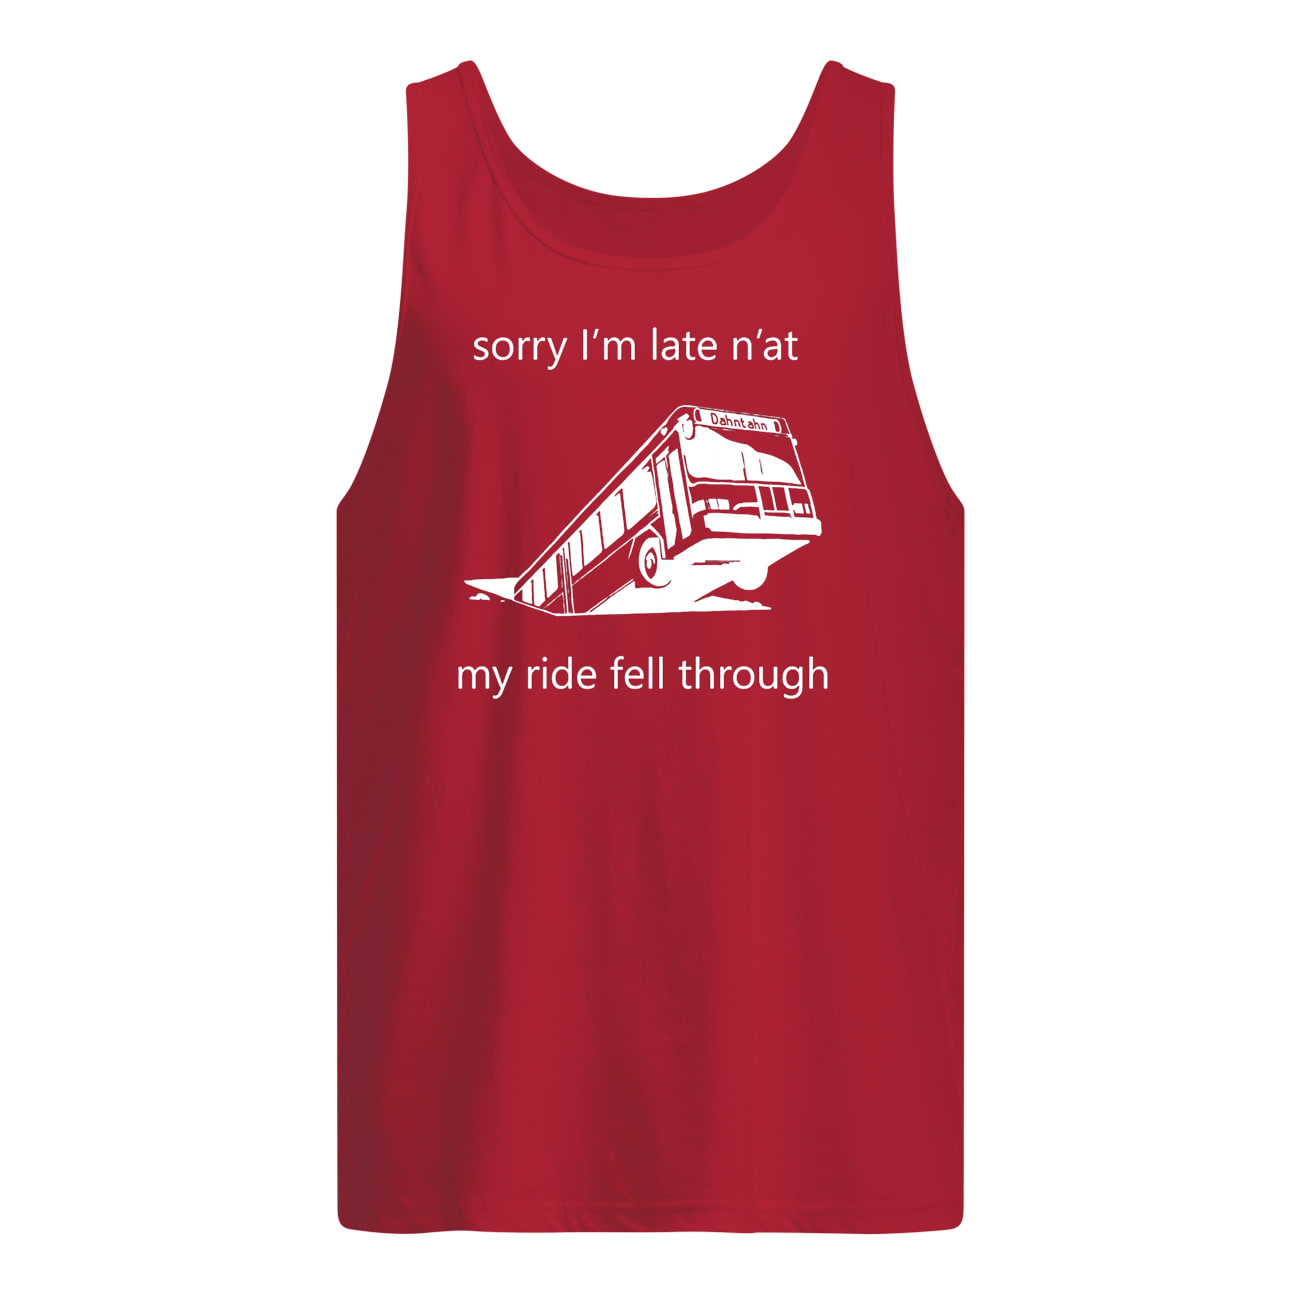 Sorry i'm late n'at my ride fell through pittsburgh bus in sinkhole tank top